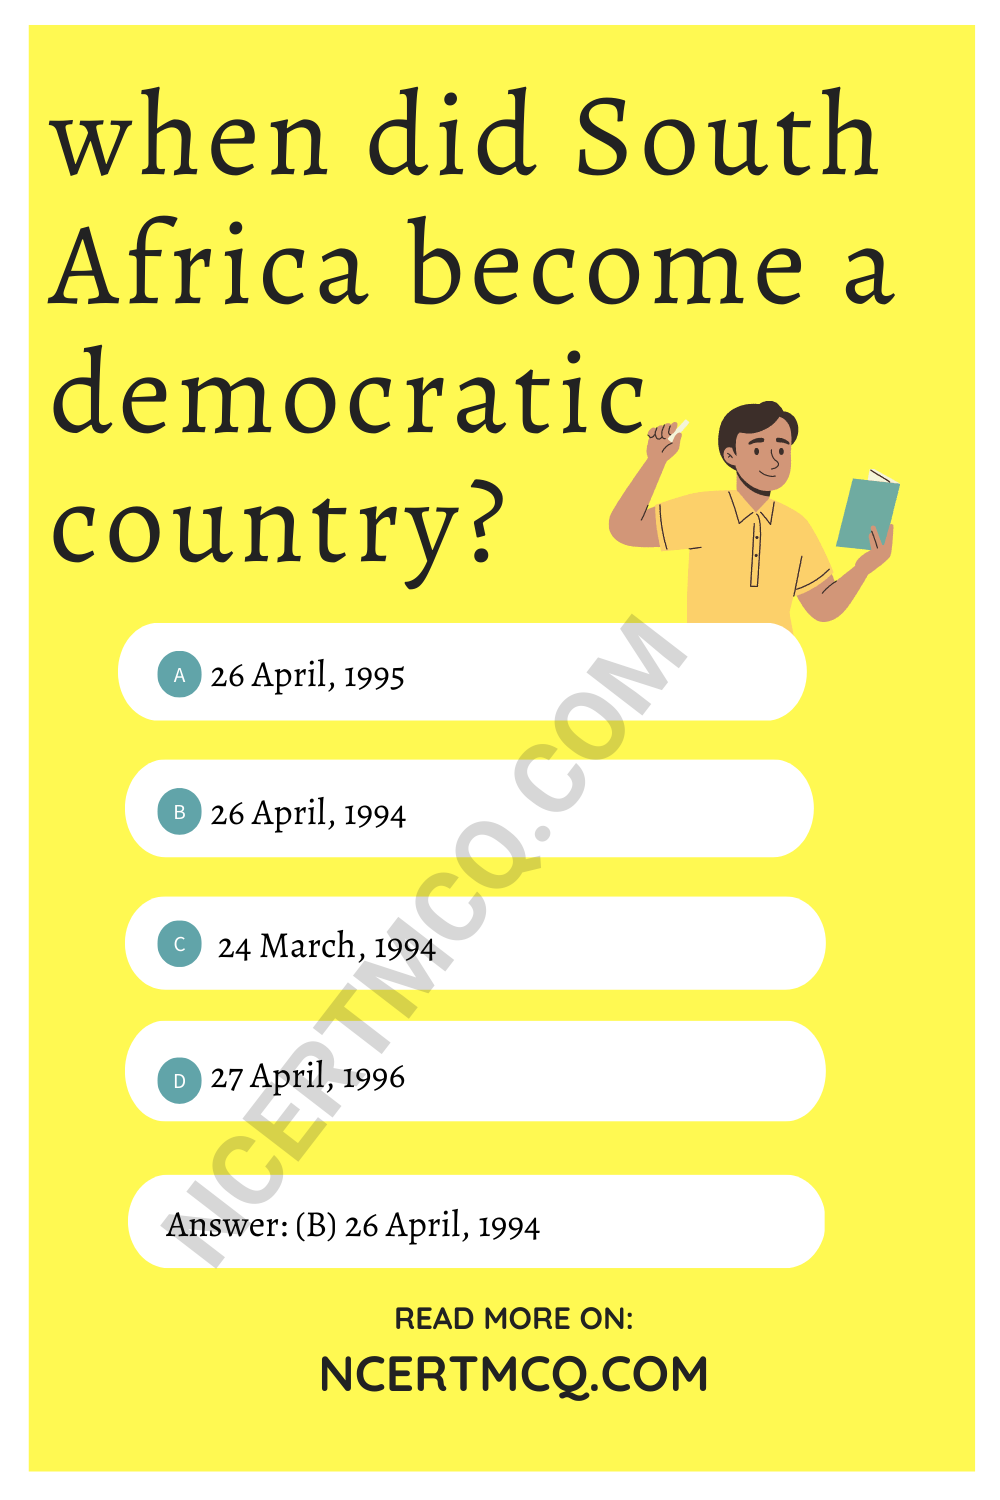 when did South Africa become a democratic country?